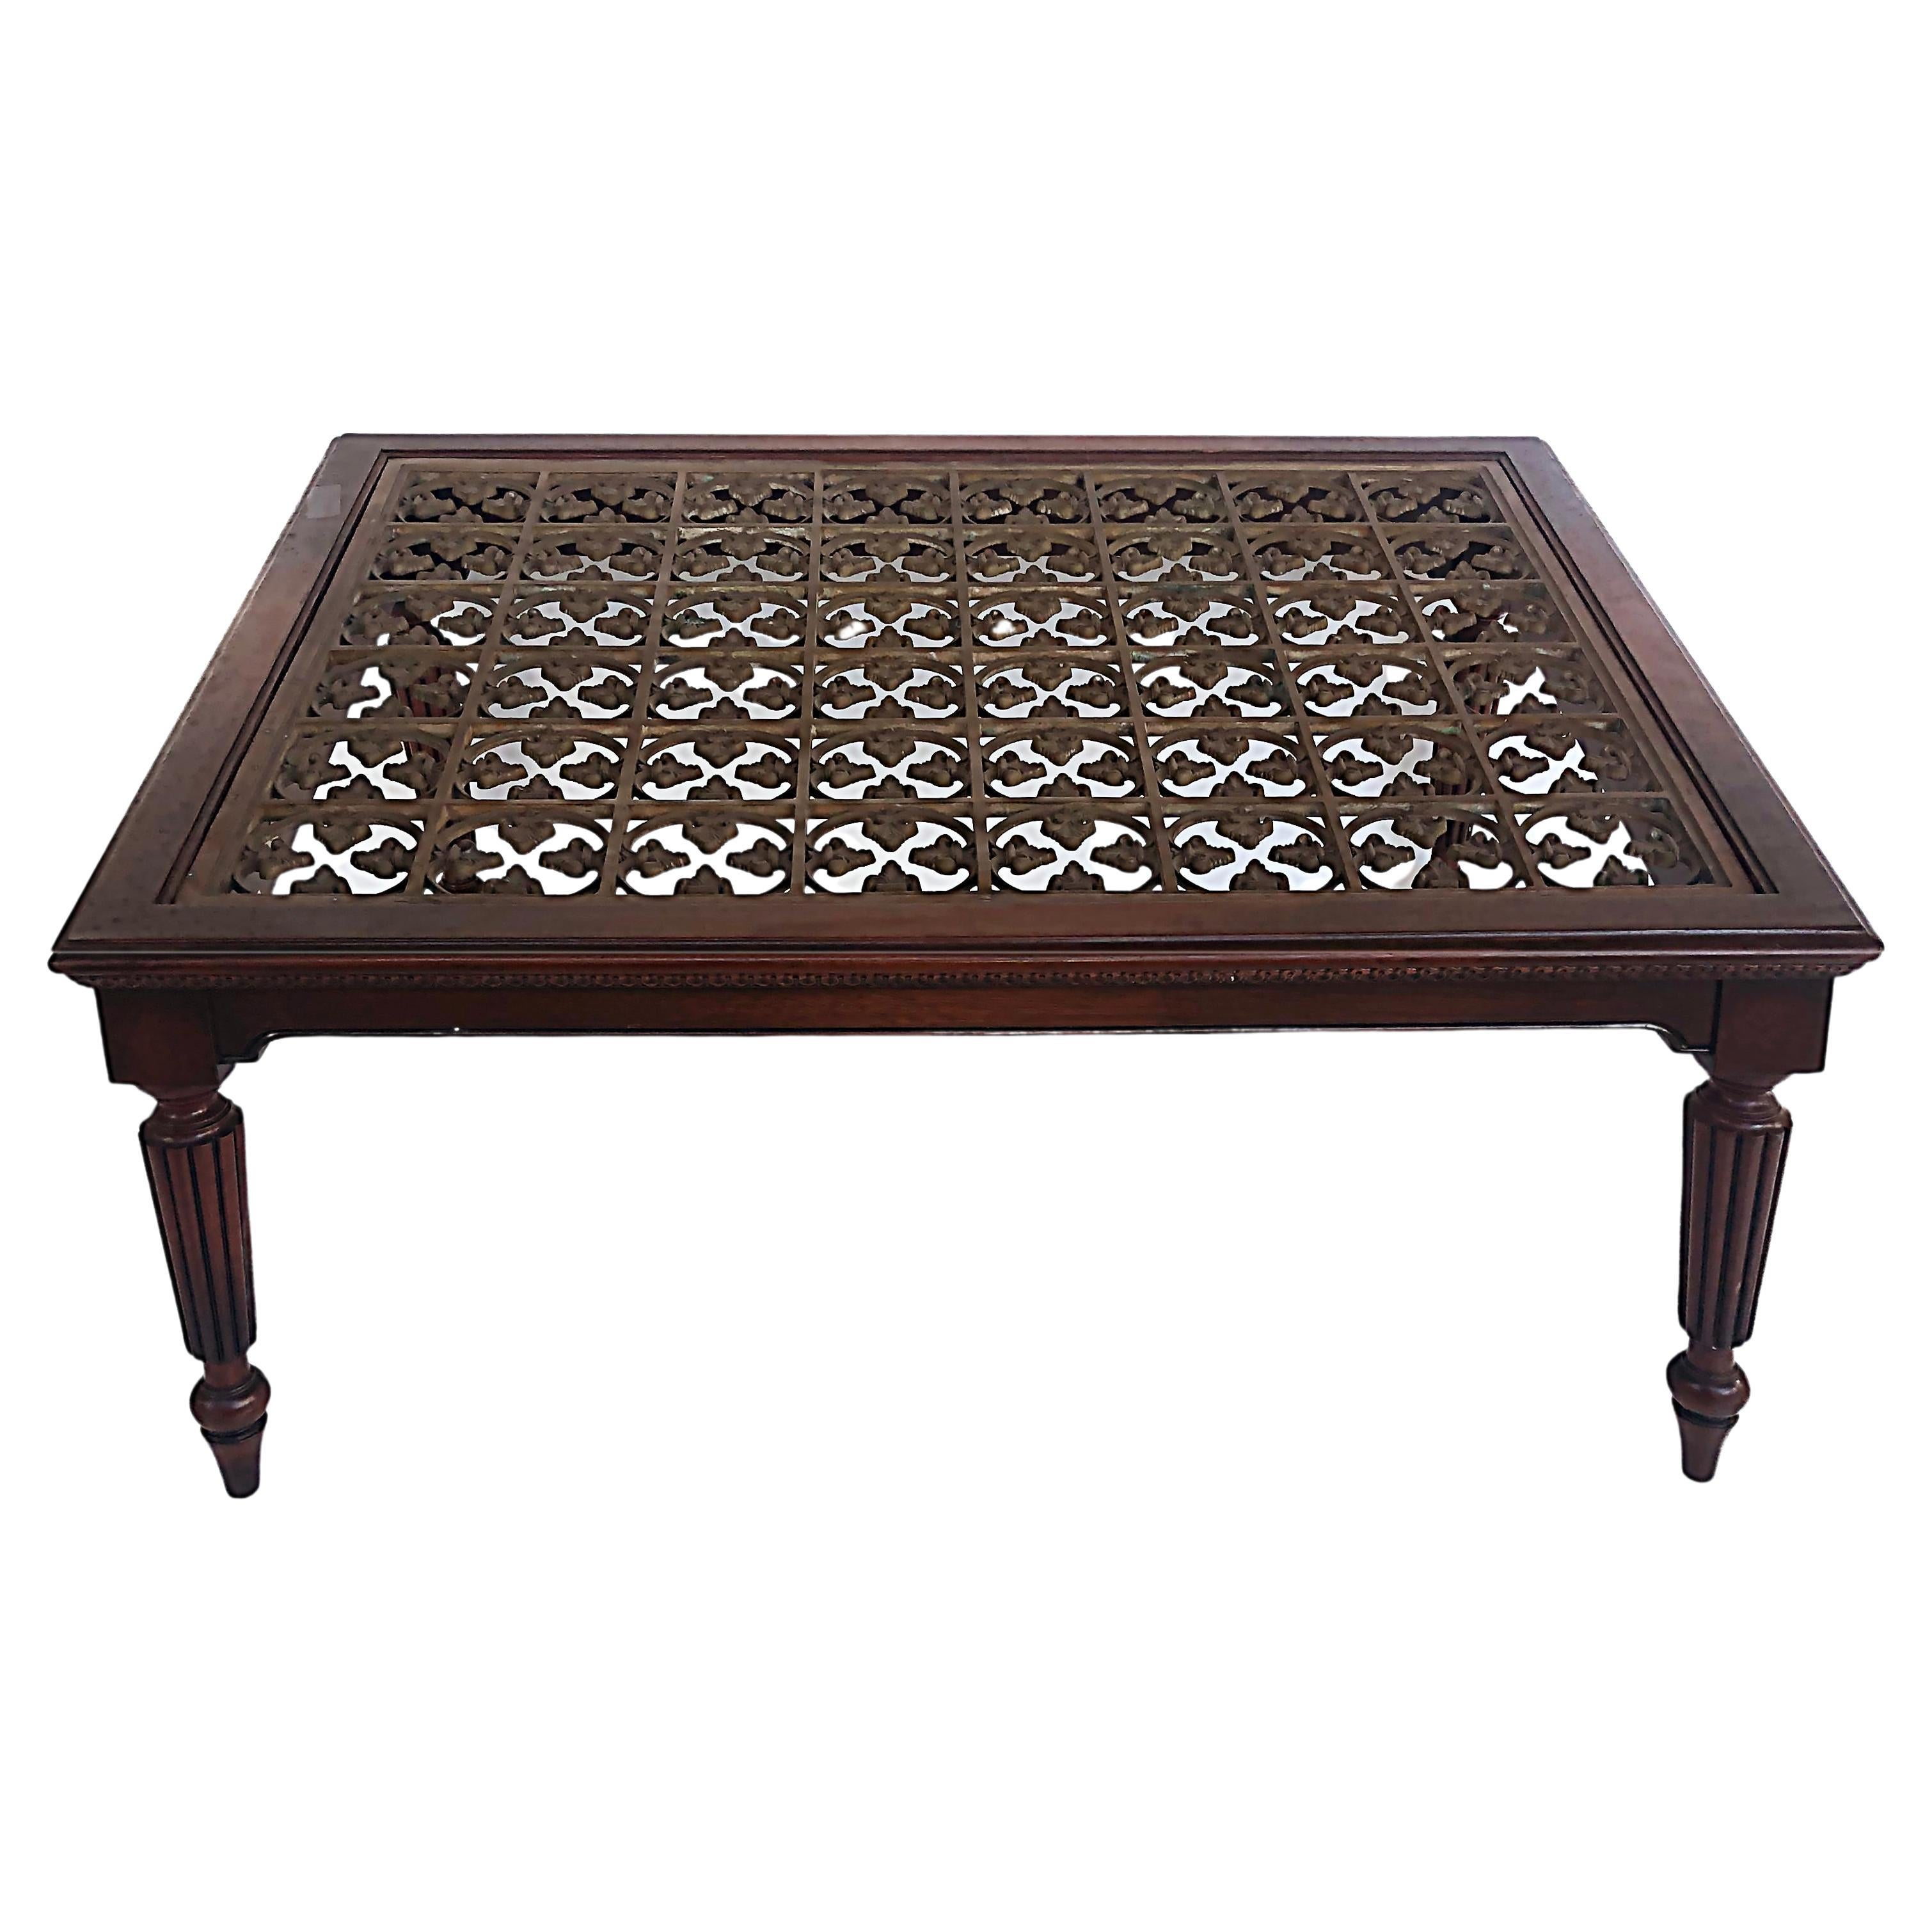 British Colonial Style Coffee Table with Inset Bronze, Christie's Auction Label